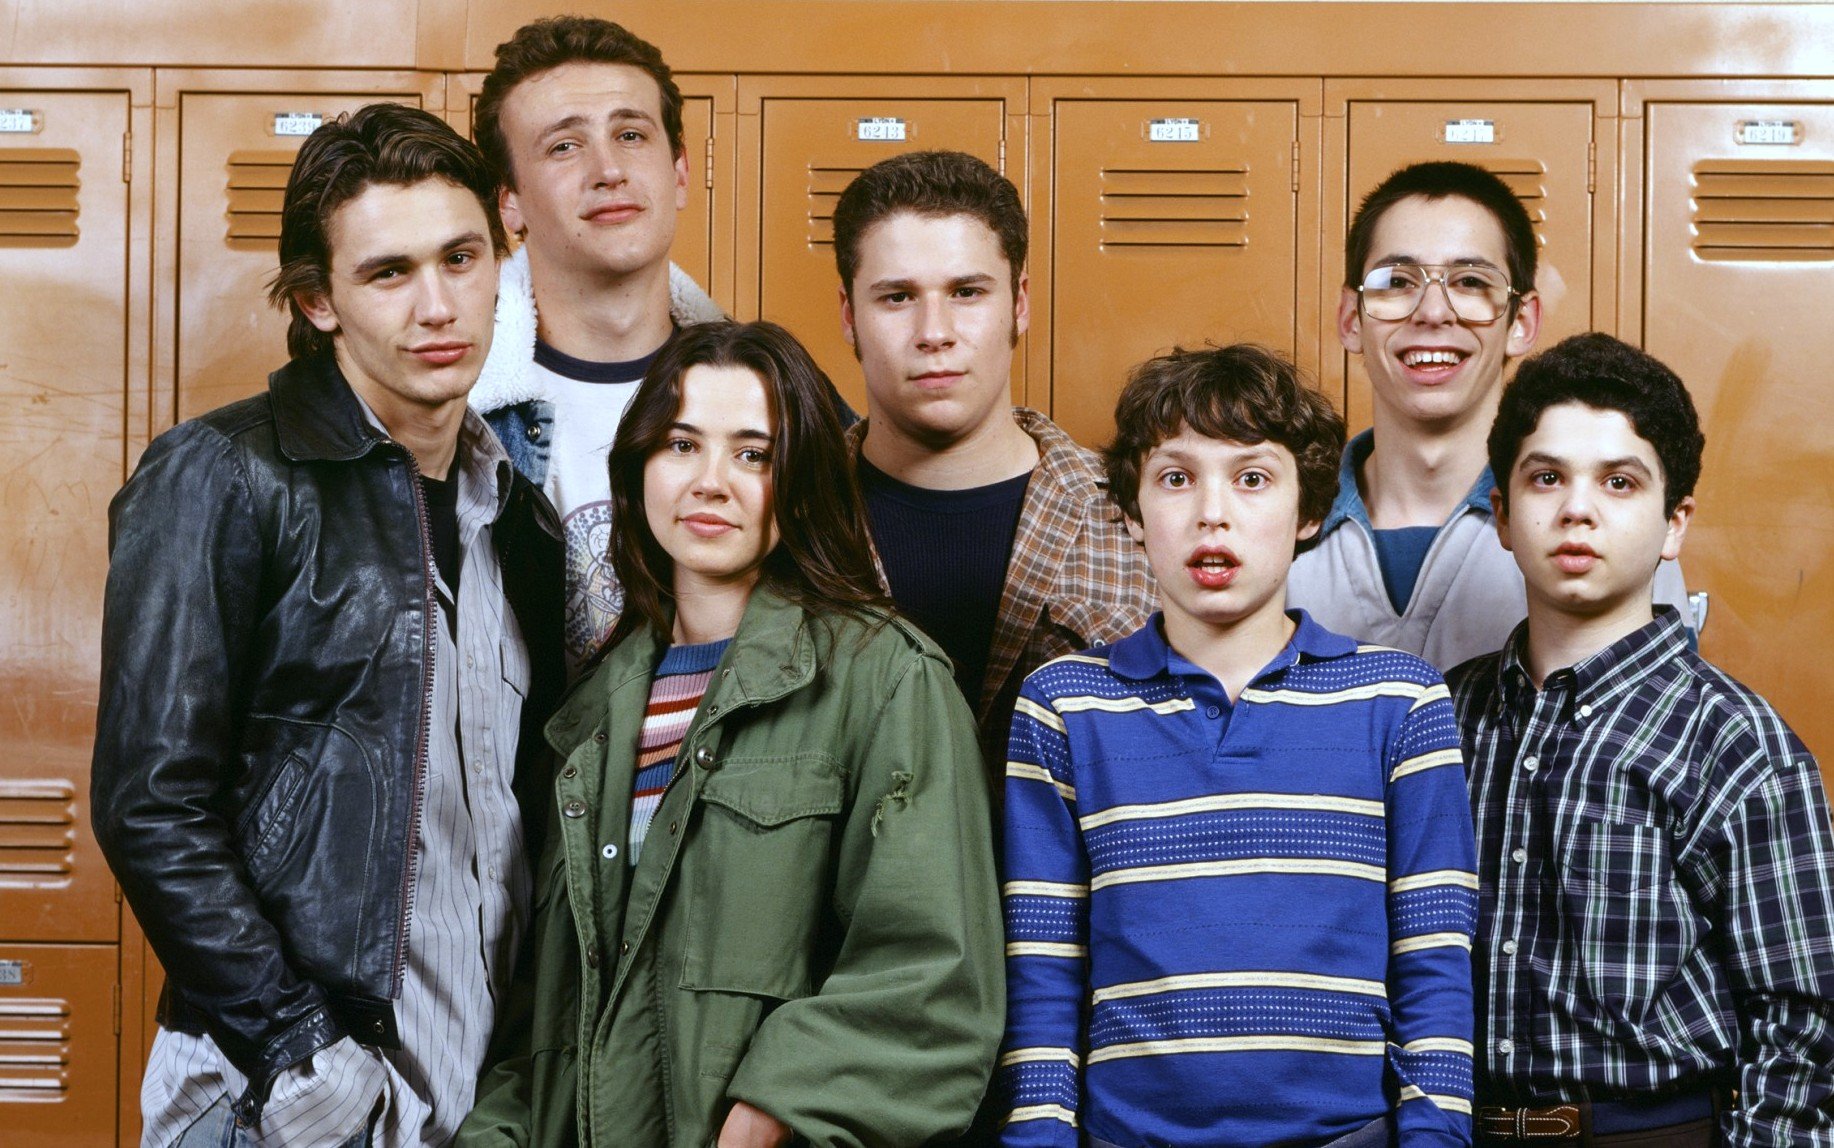 The cast of 'Freaks and Geeks' are standing together in front of orange lockers.